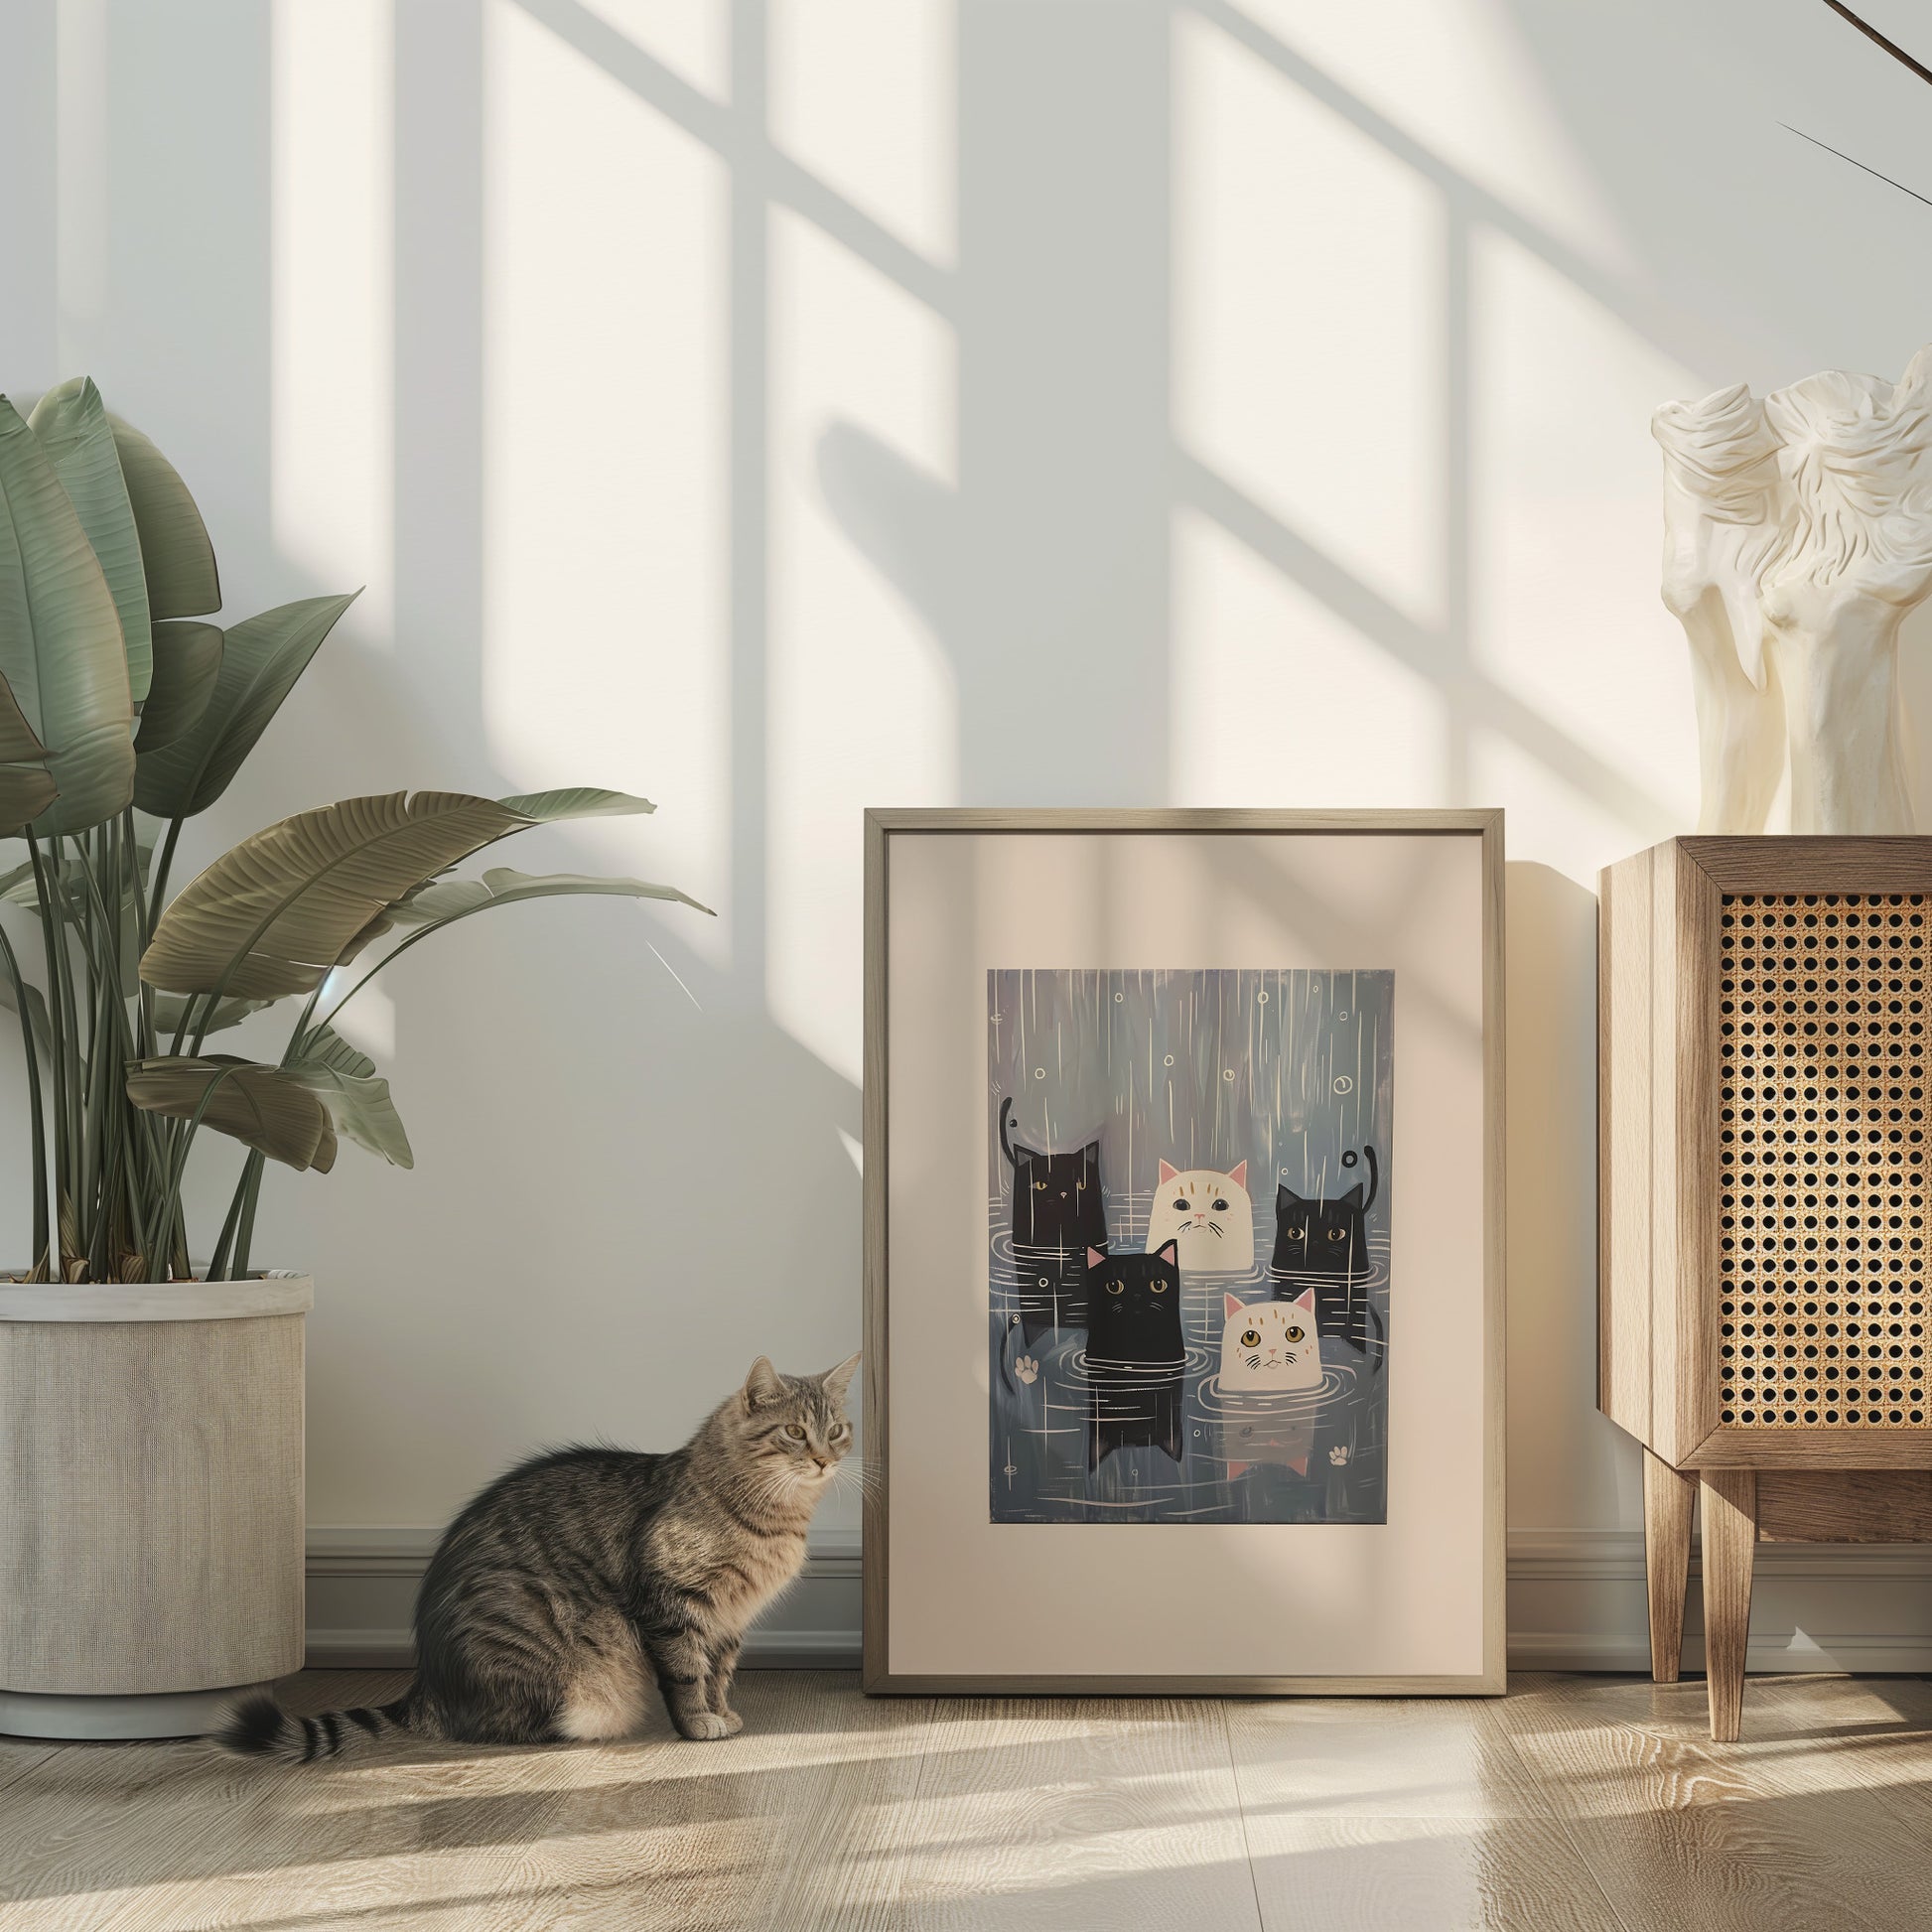 A cat sitting beside a framed picture on the floor in a sunny room with plants and decor.